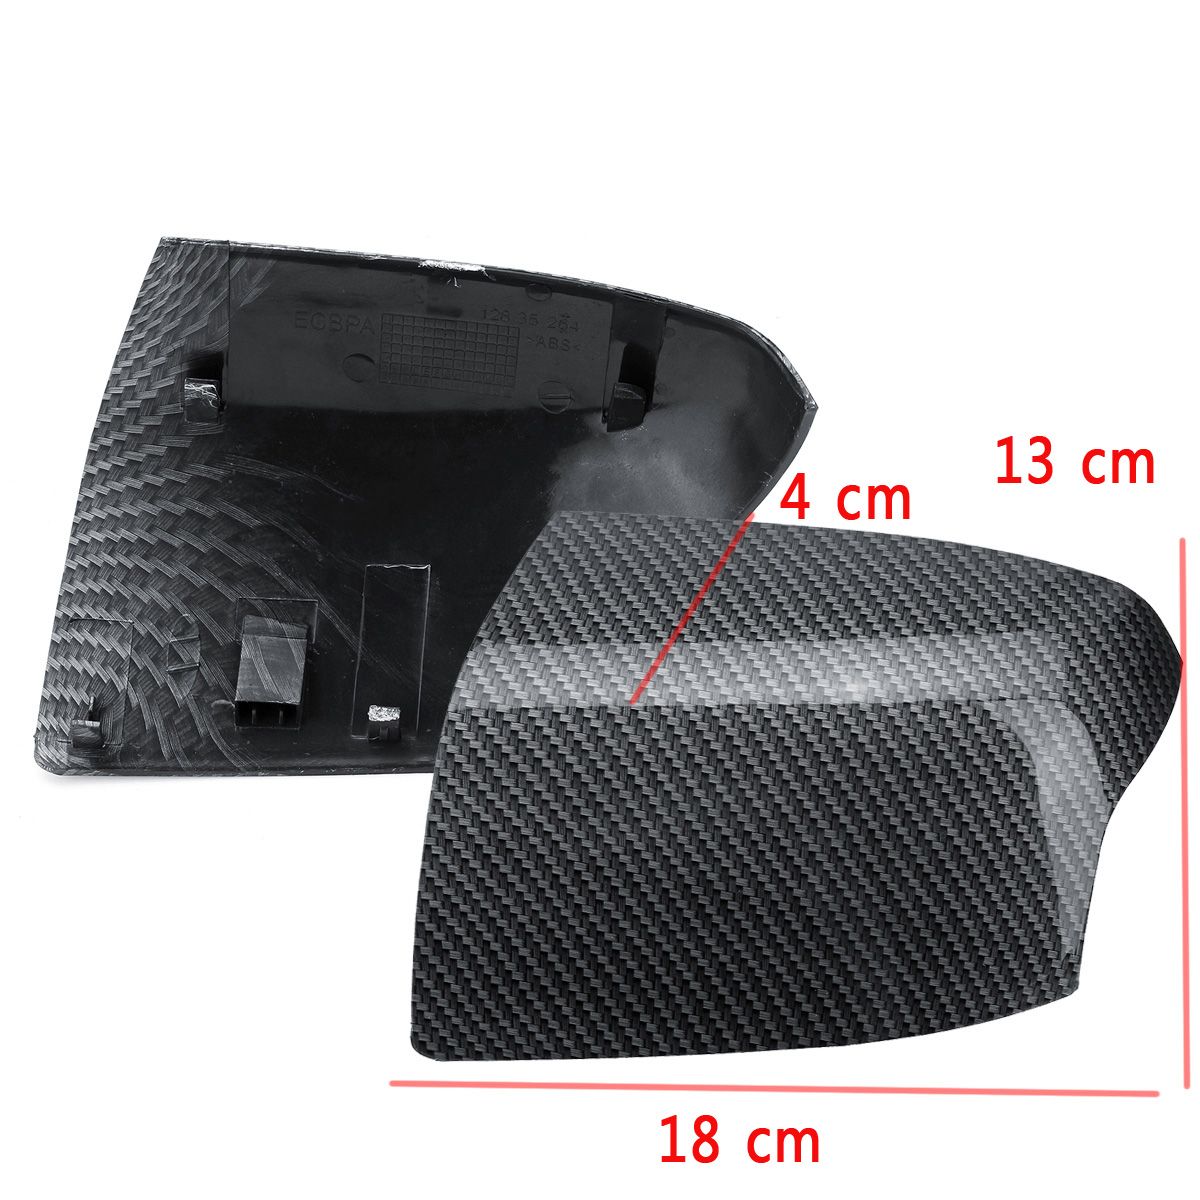 Pair-Carbon-Fiber-Car-Side-Door-NS-Primed-Wing-Mirror-Cover-Caps-For-Ford-Focus-Mk2-2005-2008-1572855